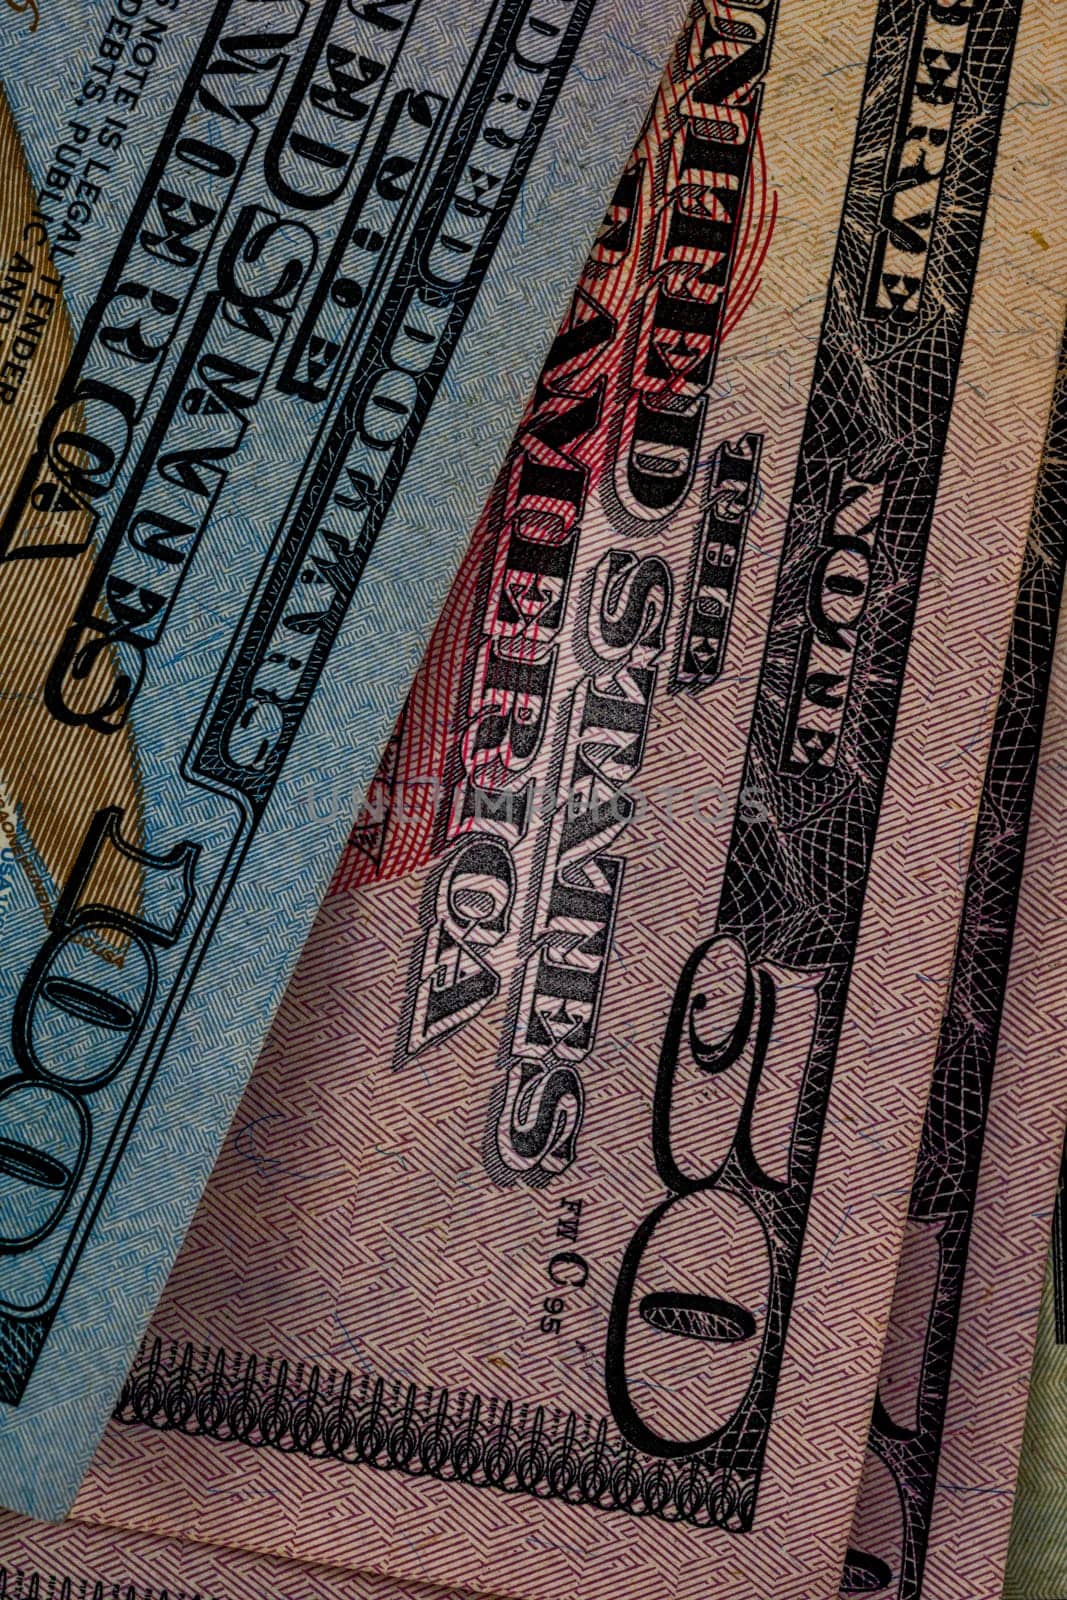 USD money banknotes, detail photo of US dollars. United States of America currency